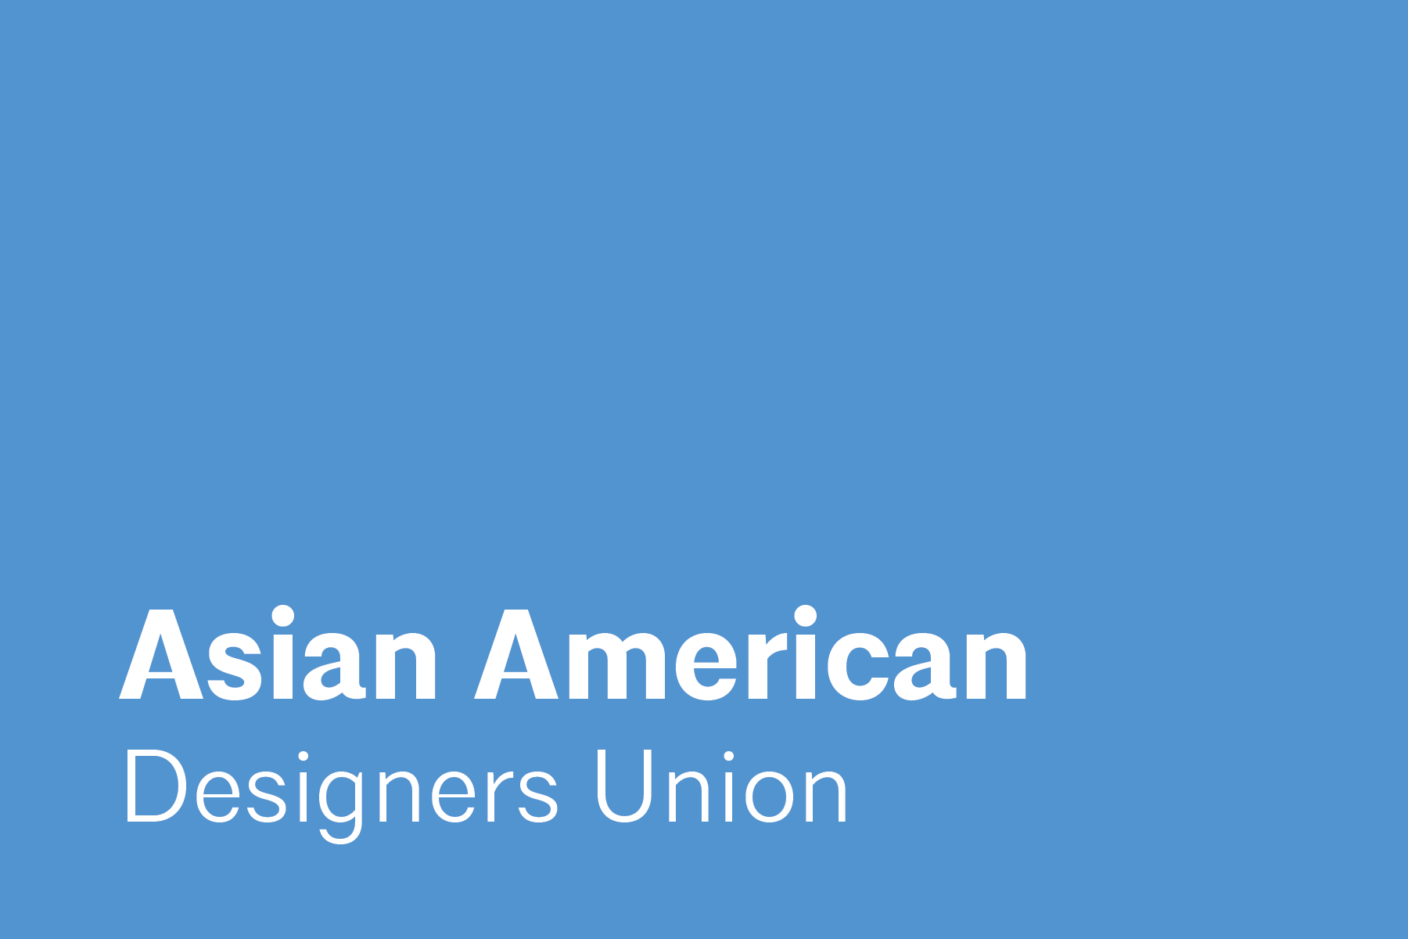 Asian American Designers Union (AADU) establishes a support system that connects, empowers, and advocates for Asian American designers and architects through collaboration, networking, education, and leadership development opportunities.